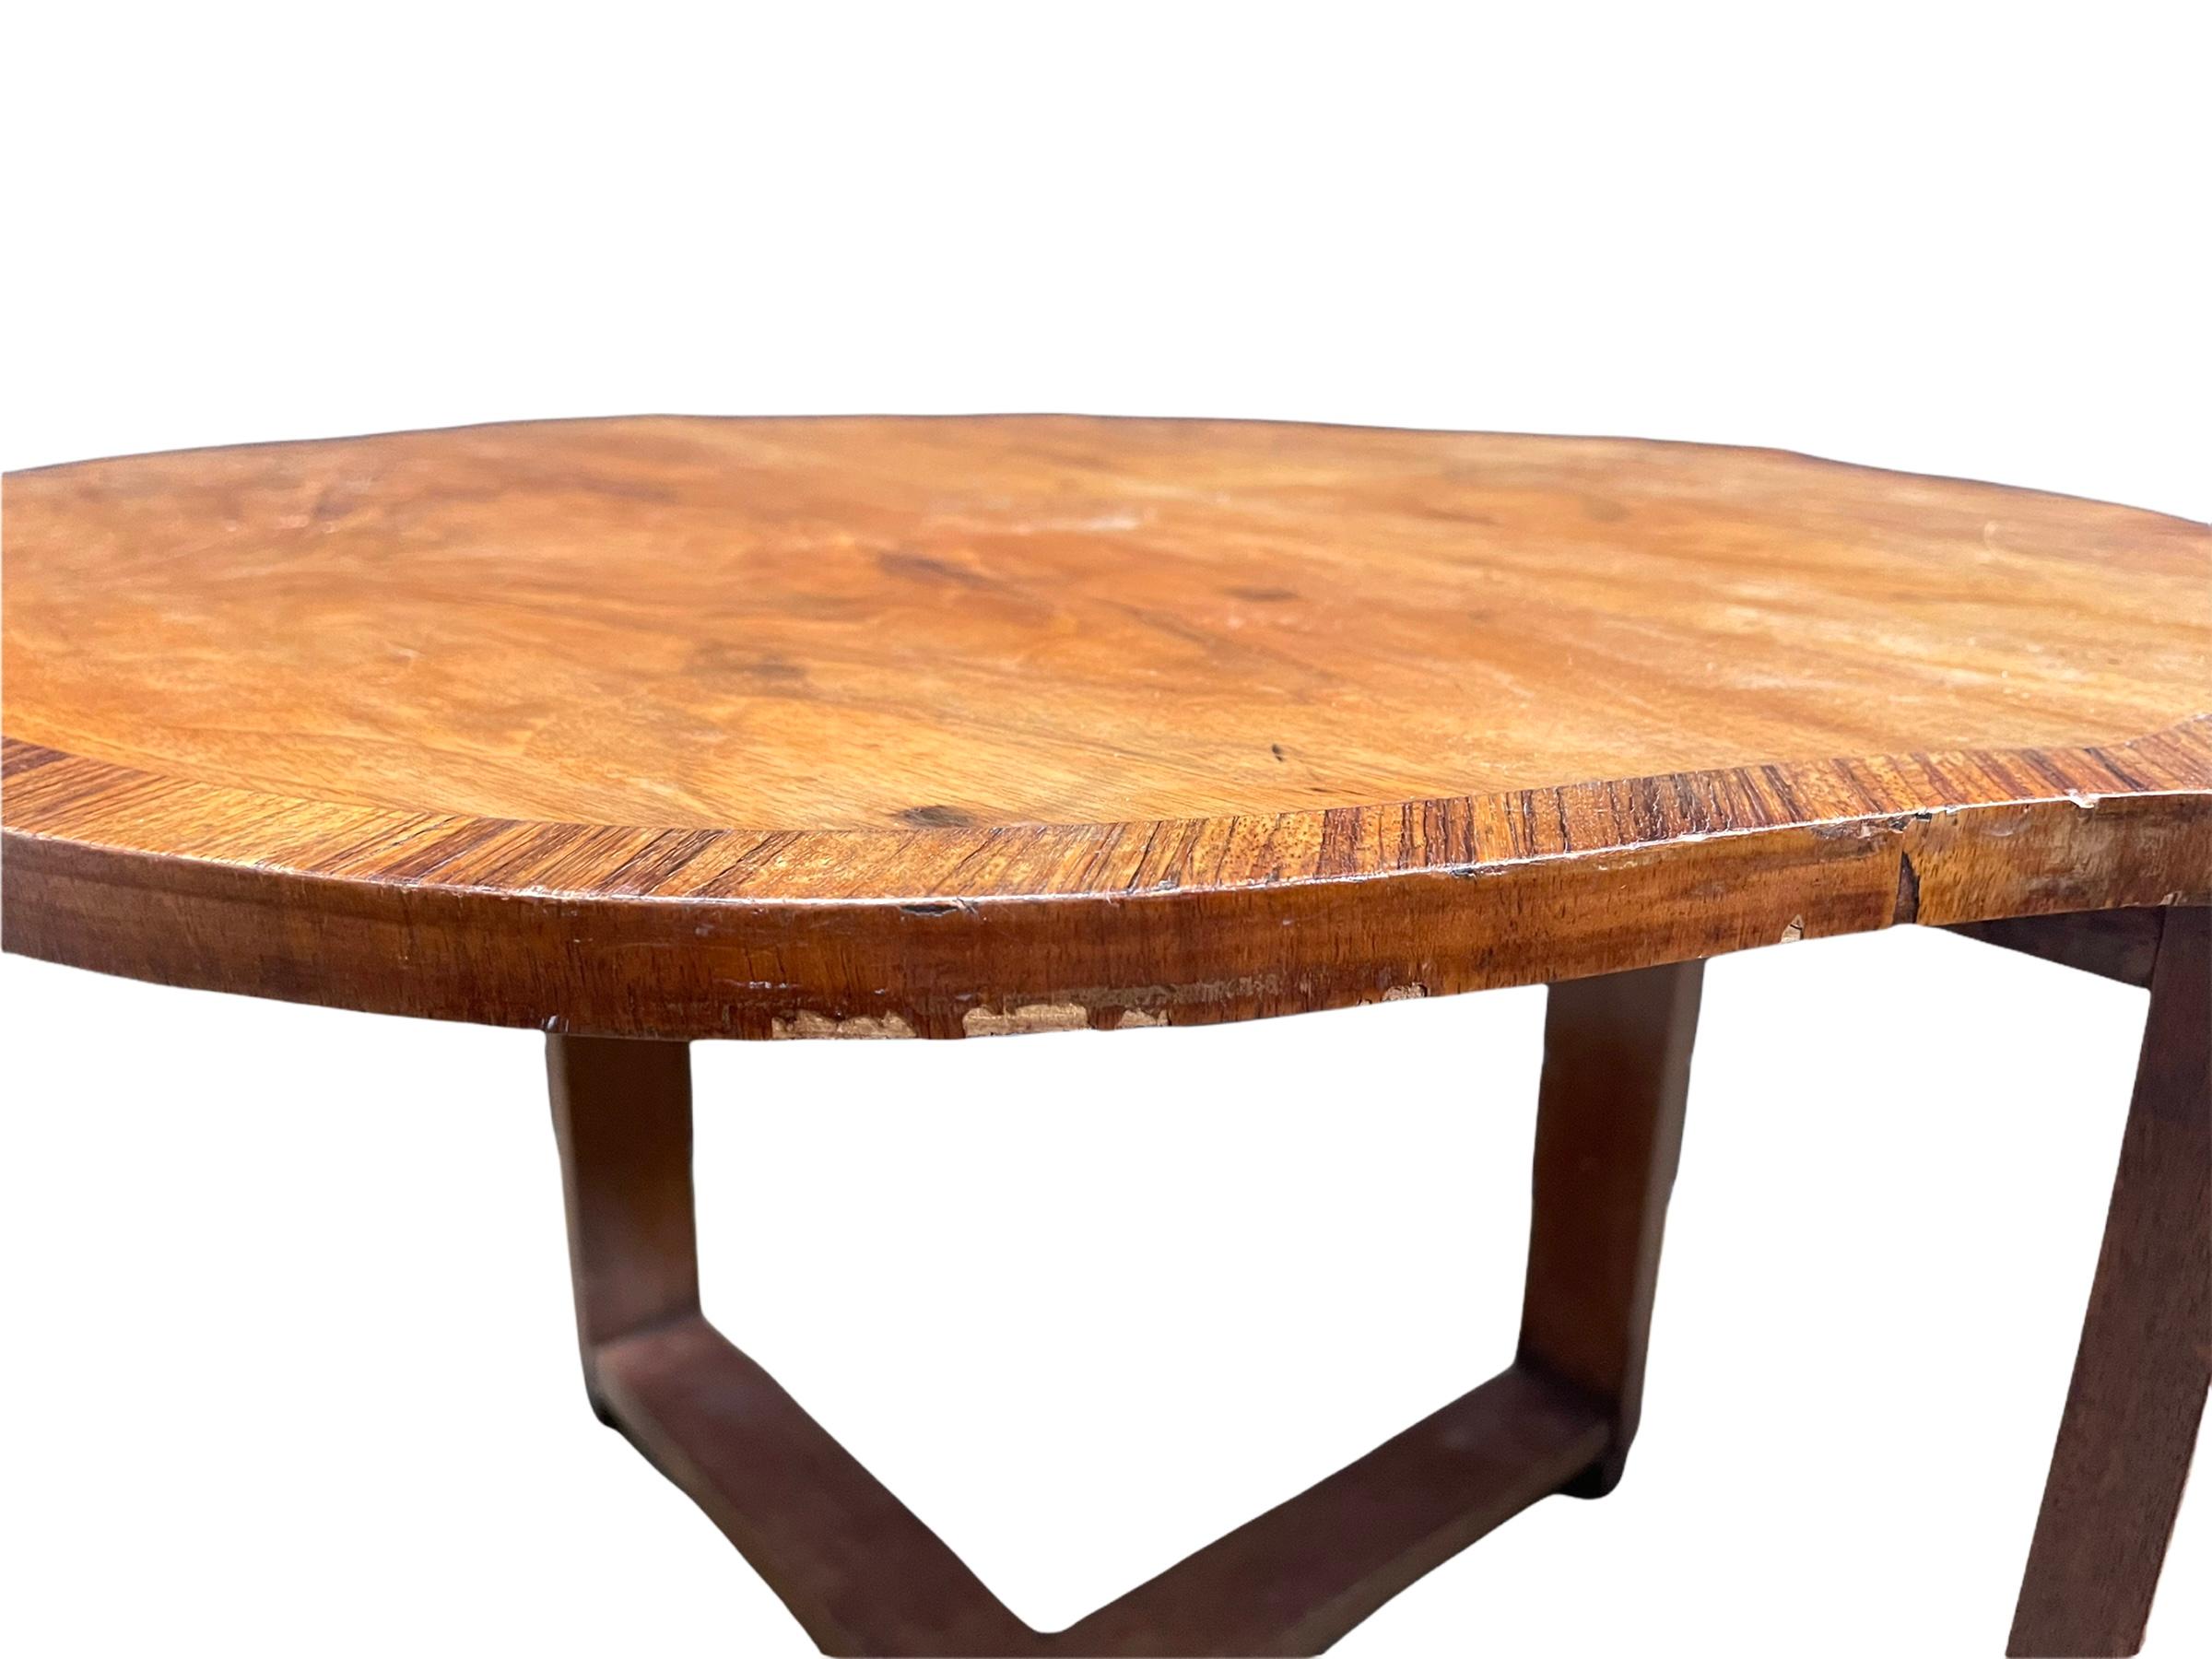 Elegant Art Deco coffee table. Handcrafted in first quality walnut wood circa 1930s, London.

Measures: 20.5” Height x 27.5” Diameter.